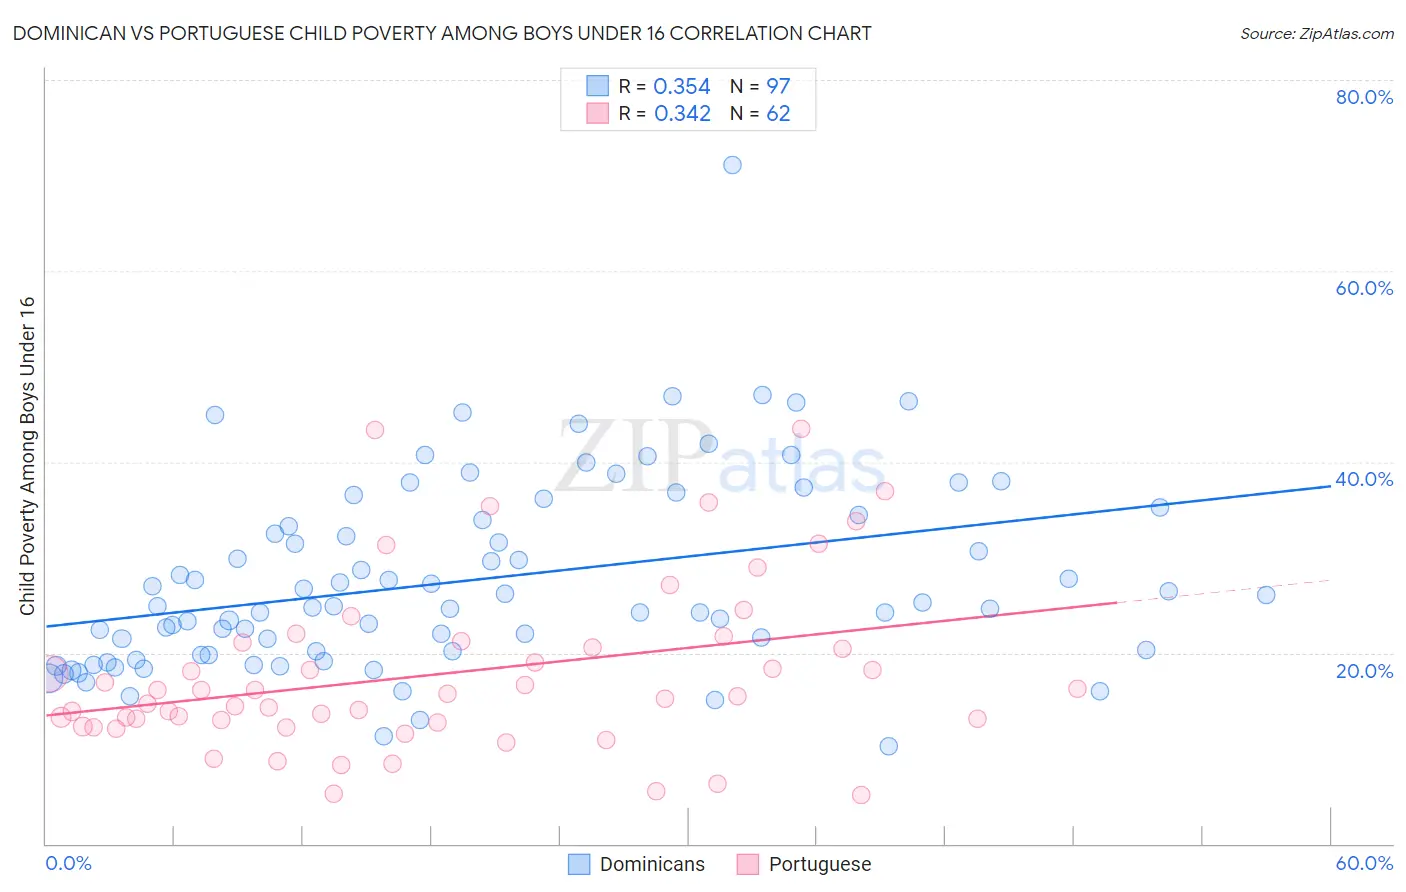 Dominican vs Portuguese Child Poverty Among Boys Under 16